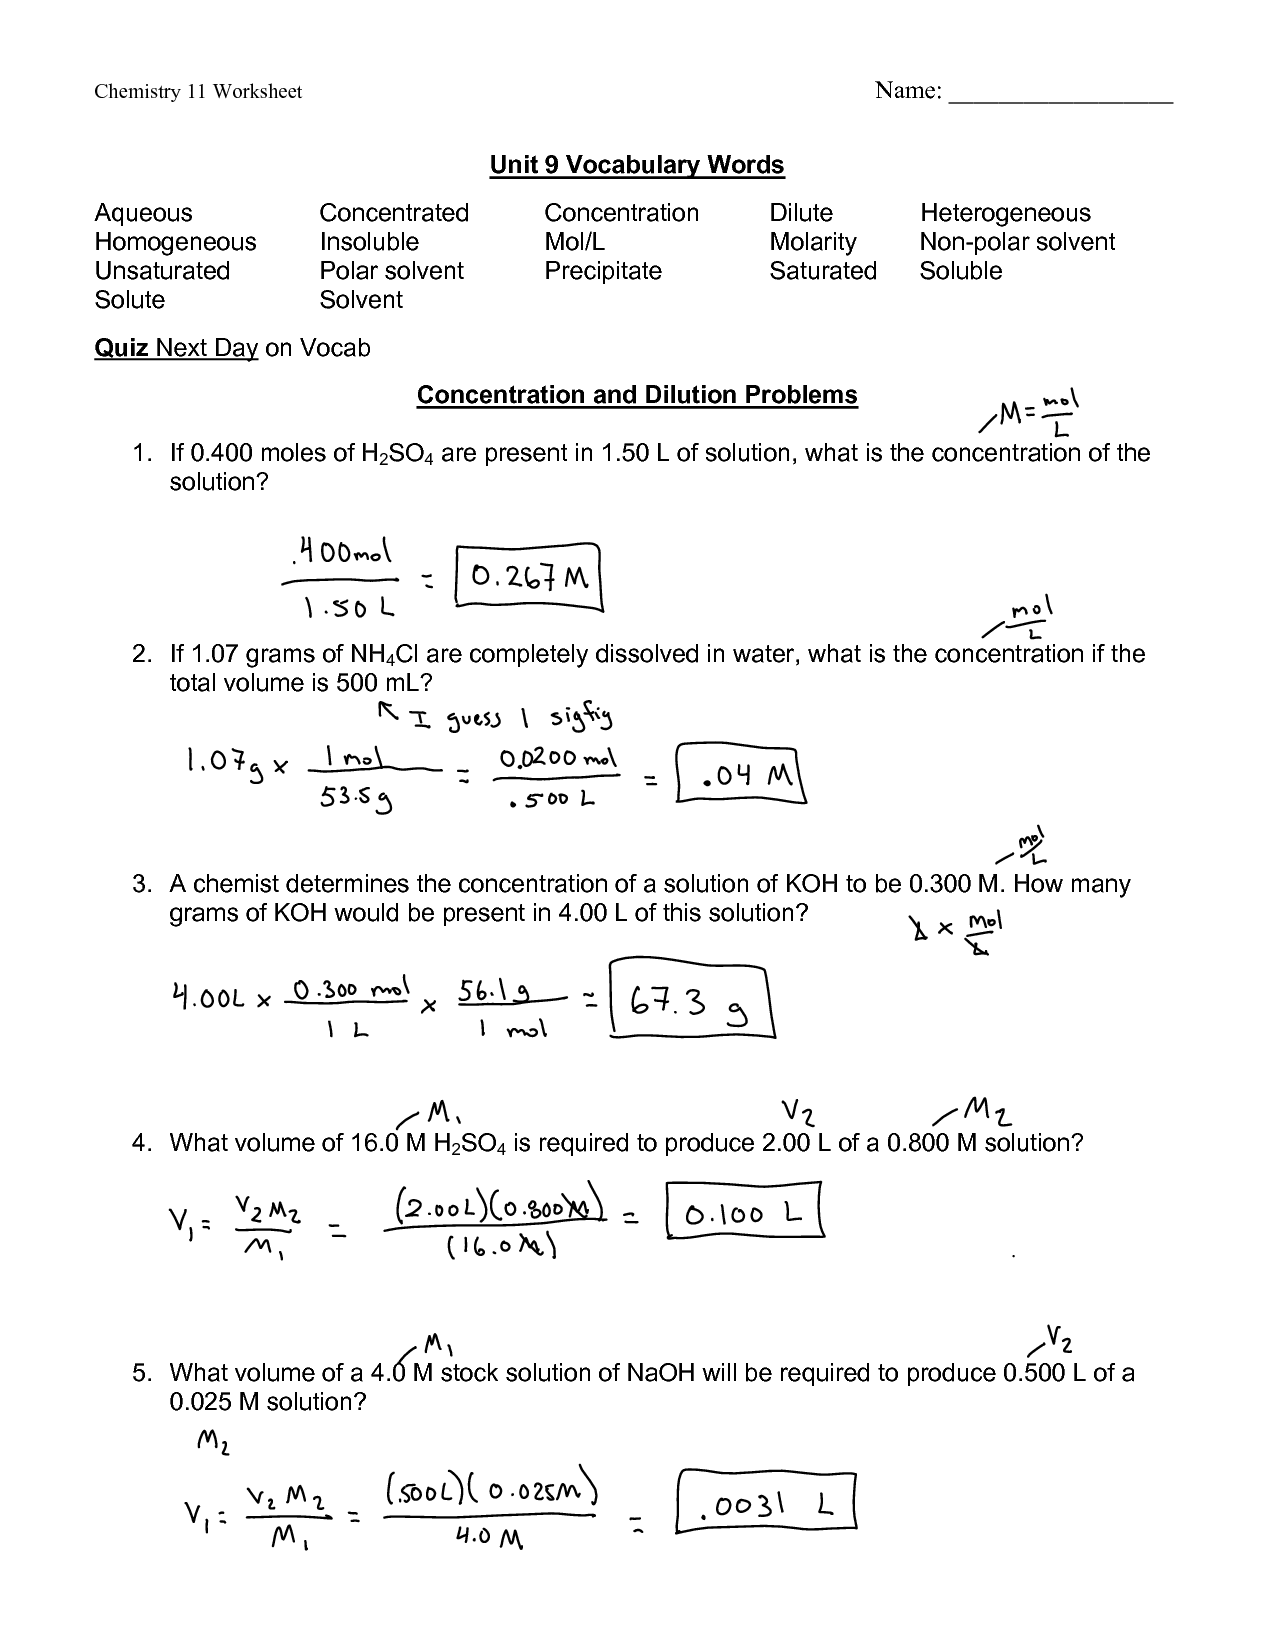 Concentration Worksheet Answers